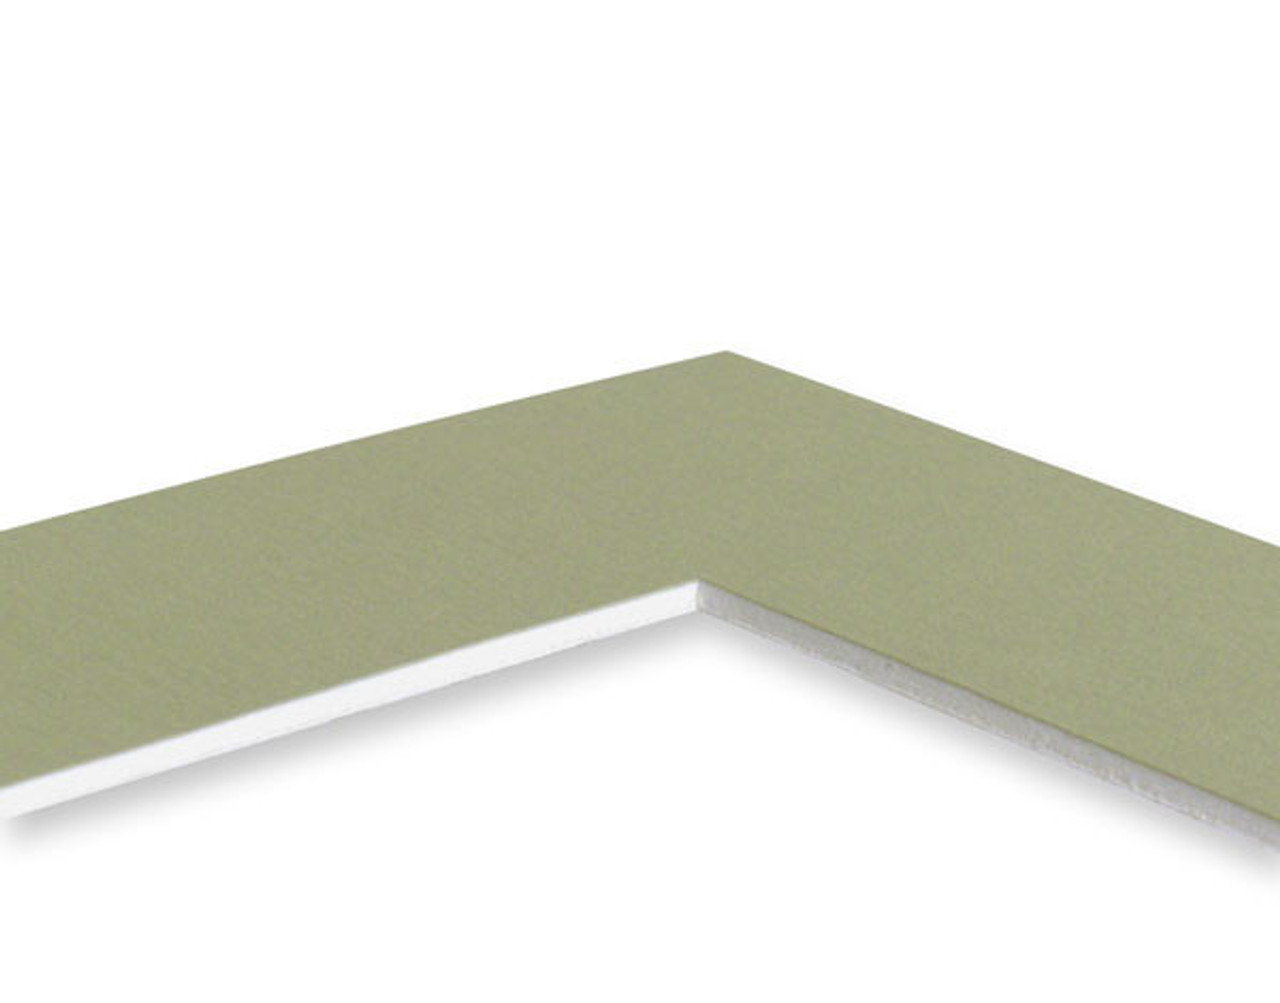 11x14 Single 25 Pack (Standard White Core) -  - includes mats, backing and sleeves!